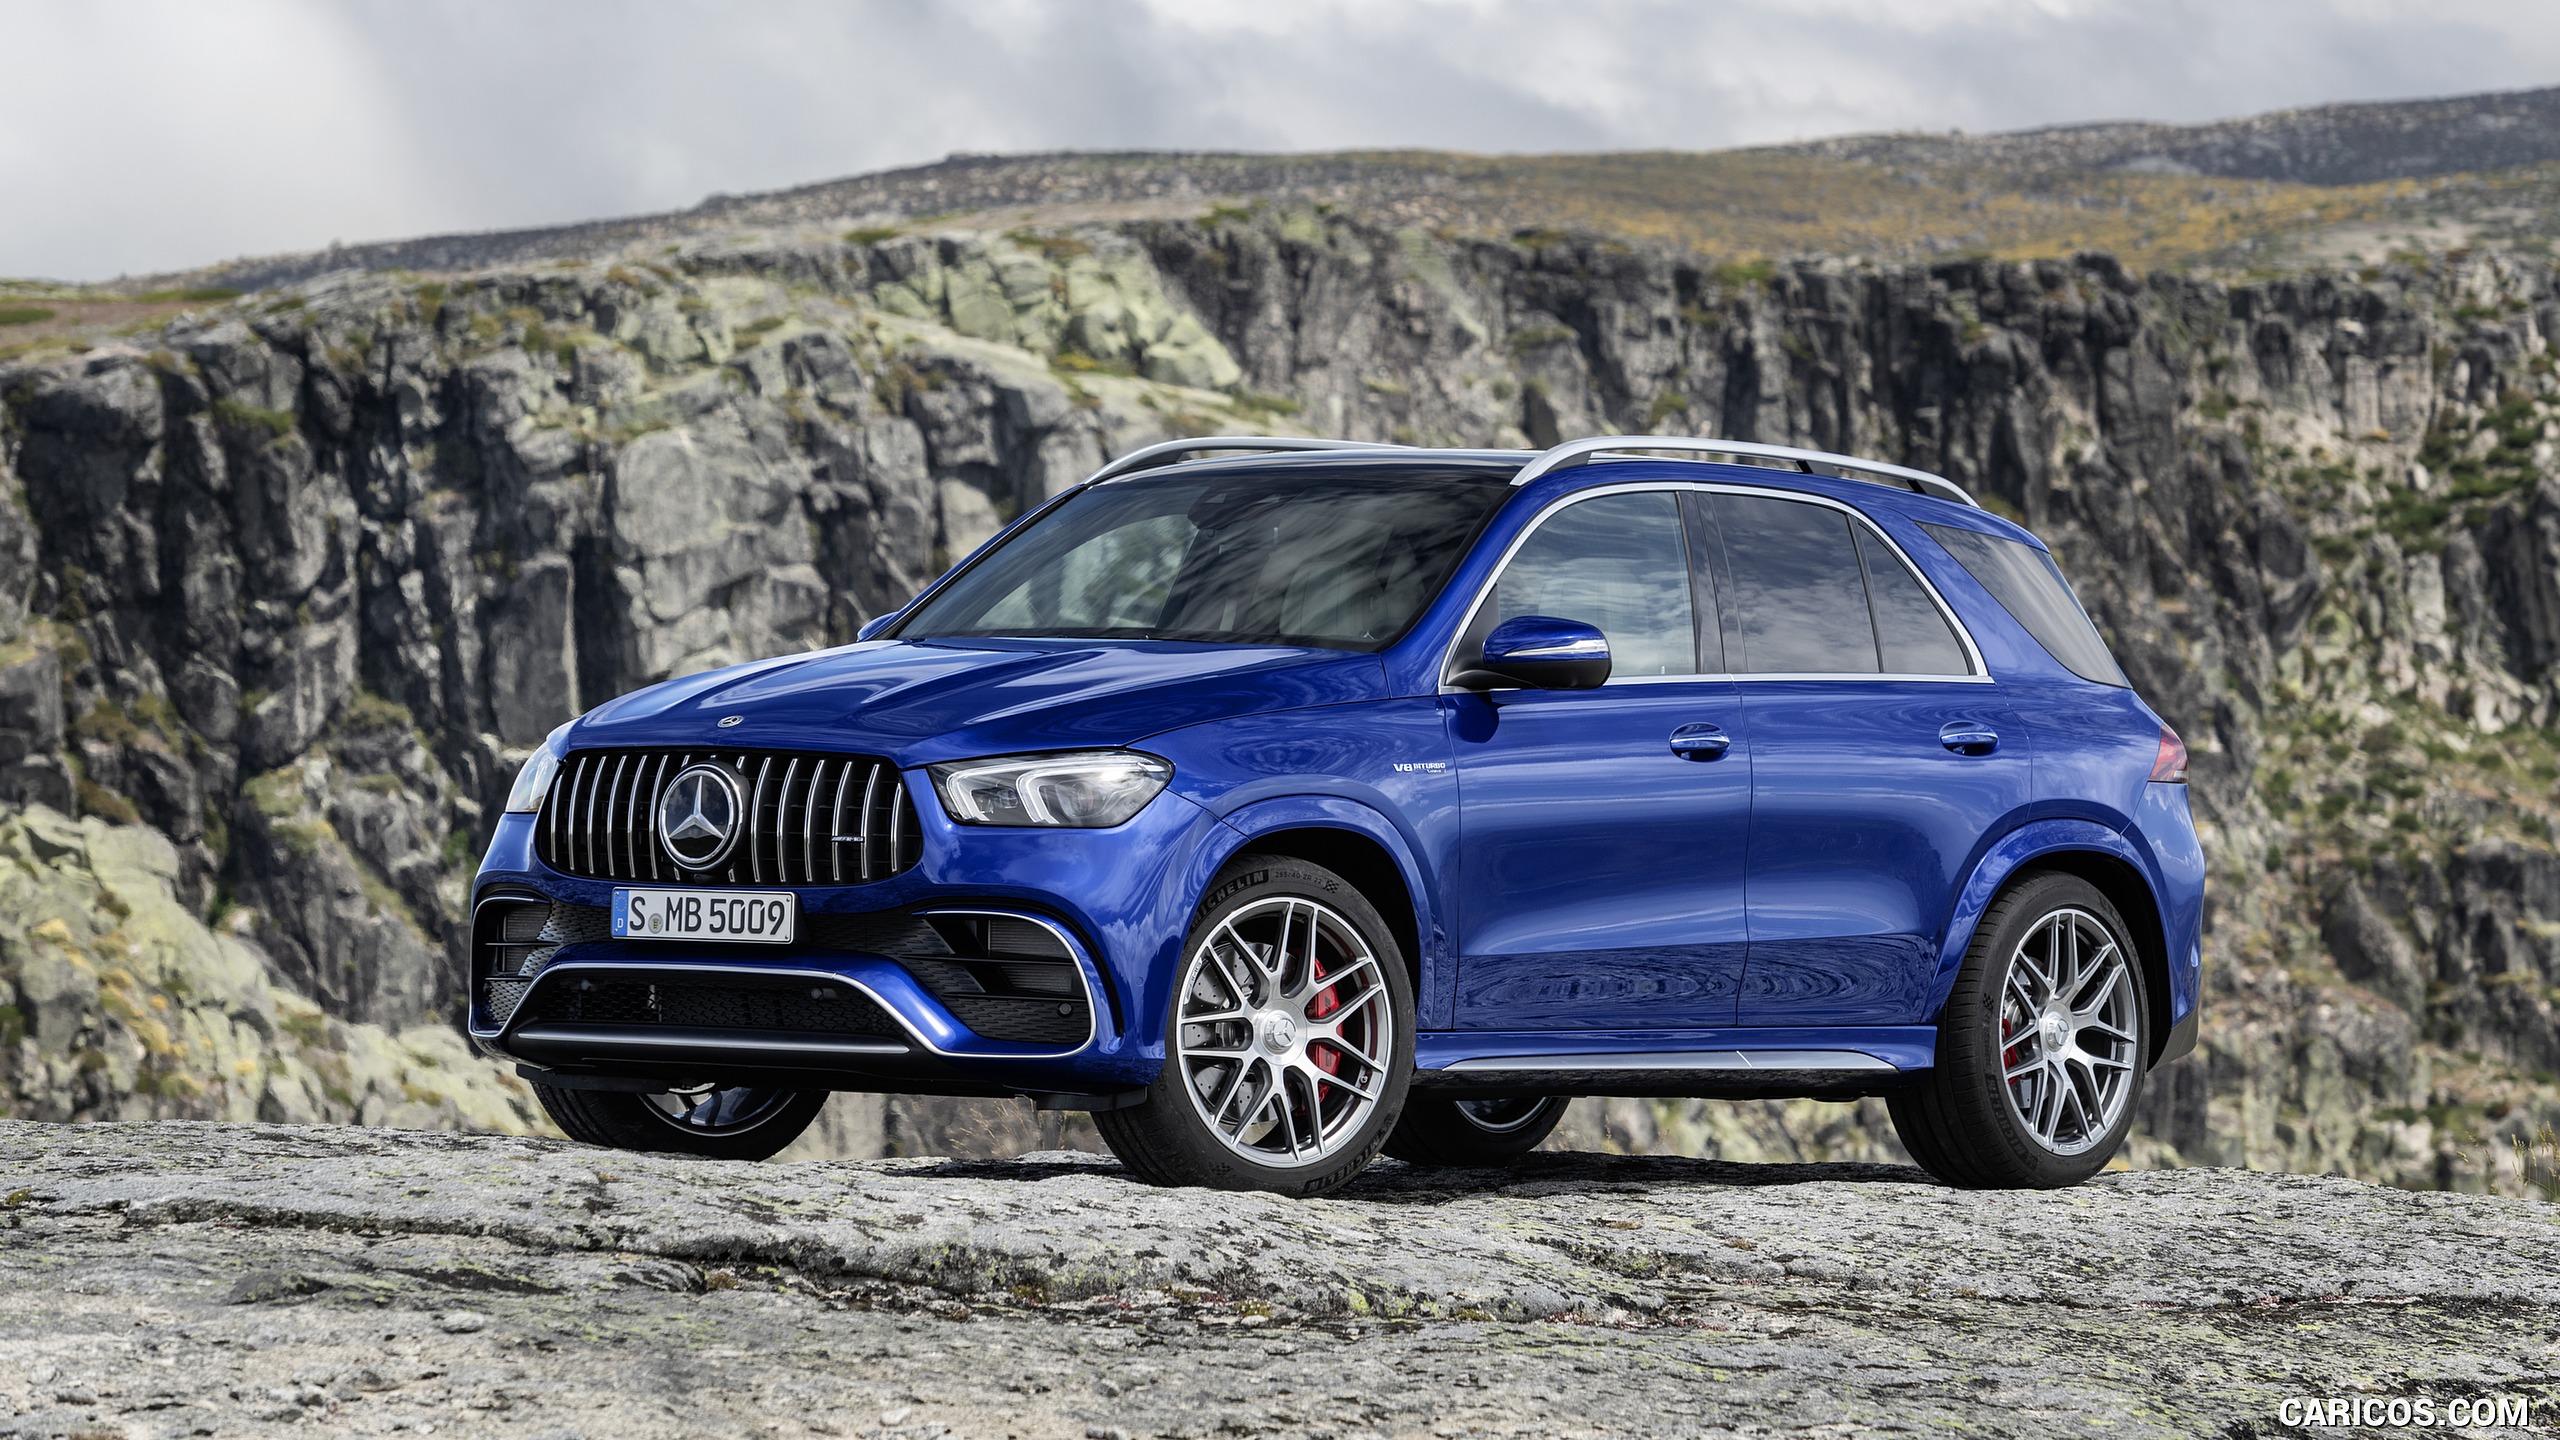 2021 Mercedes-AMG GLE 63 S 4MATIC - Front Three-Quarter, #12 of 187